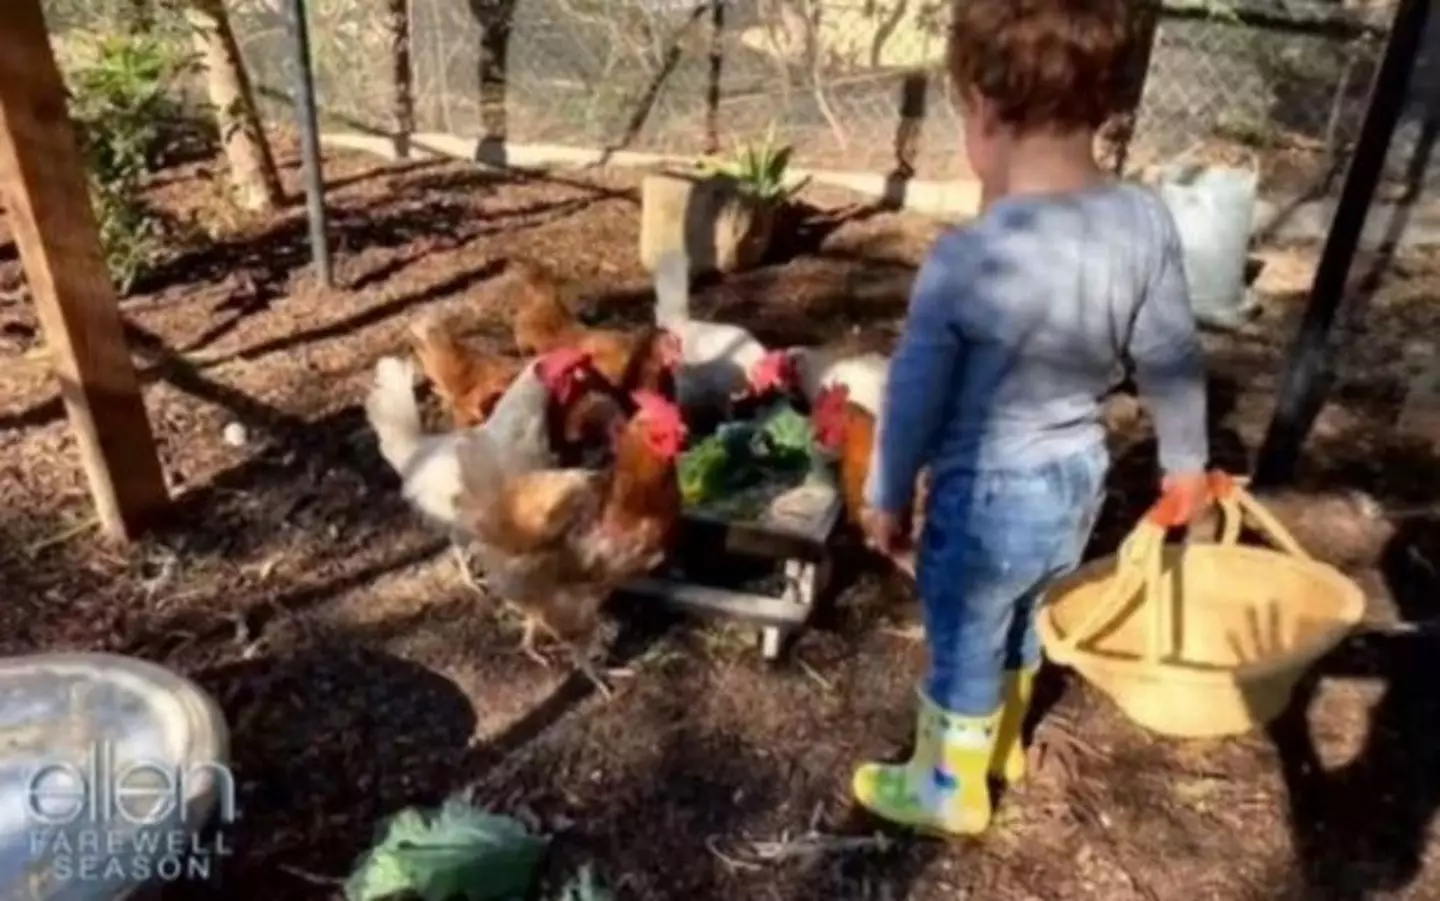 Archie was back tending to his chickens (